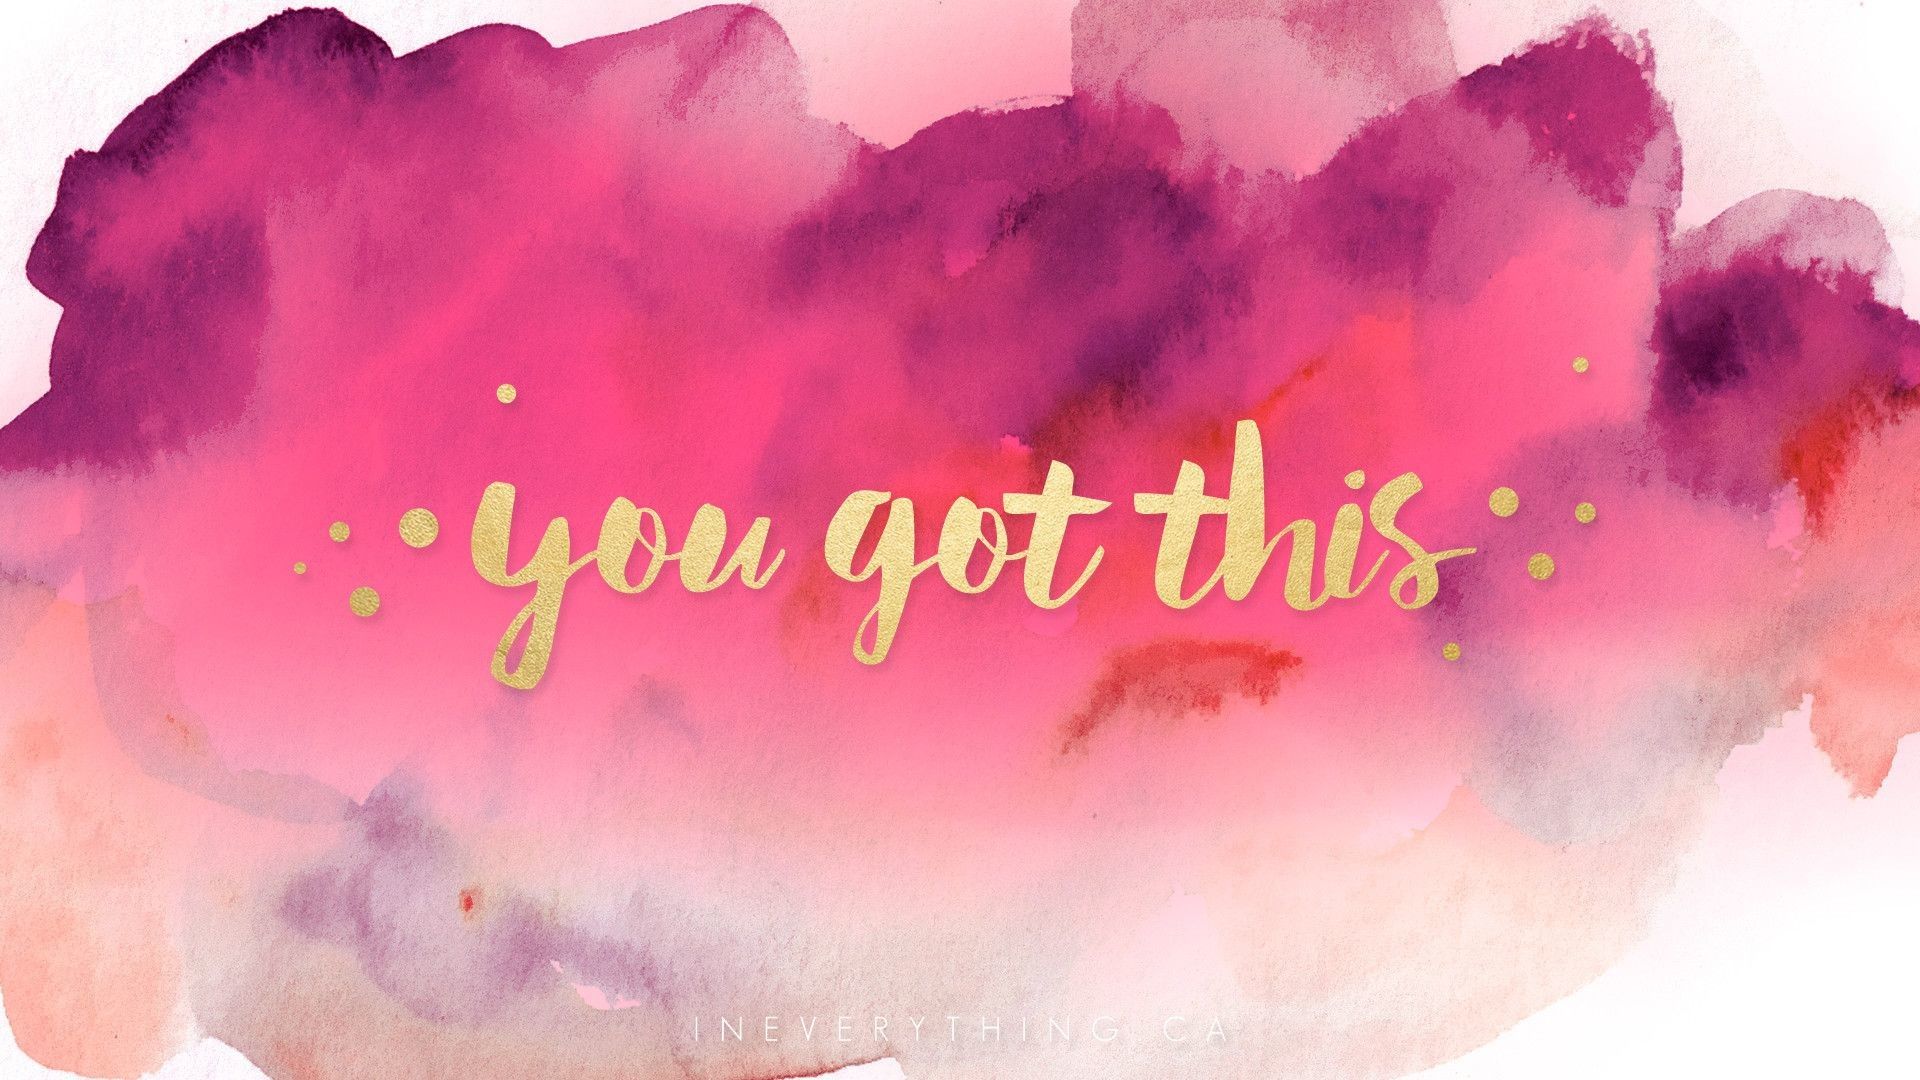 You got this watercolor background with gold text - Chromebook, school